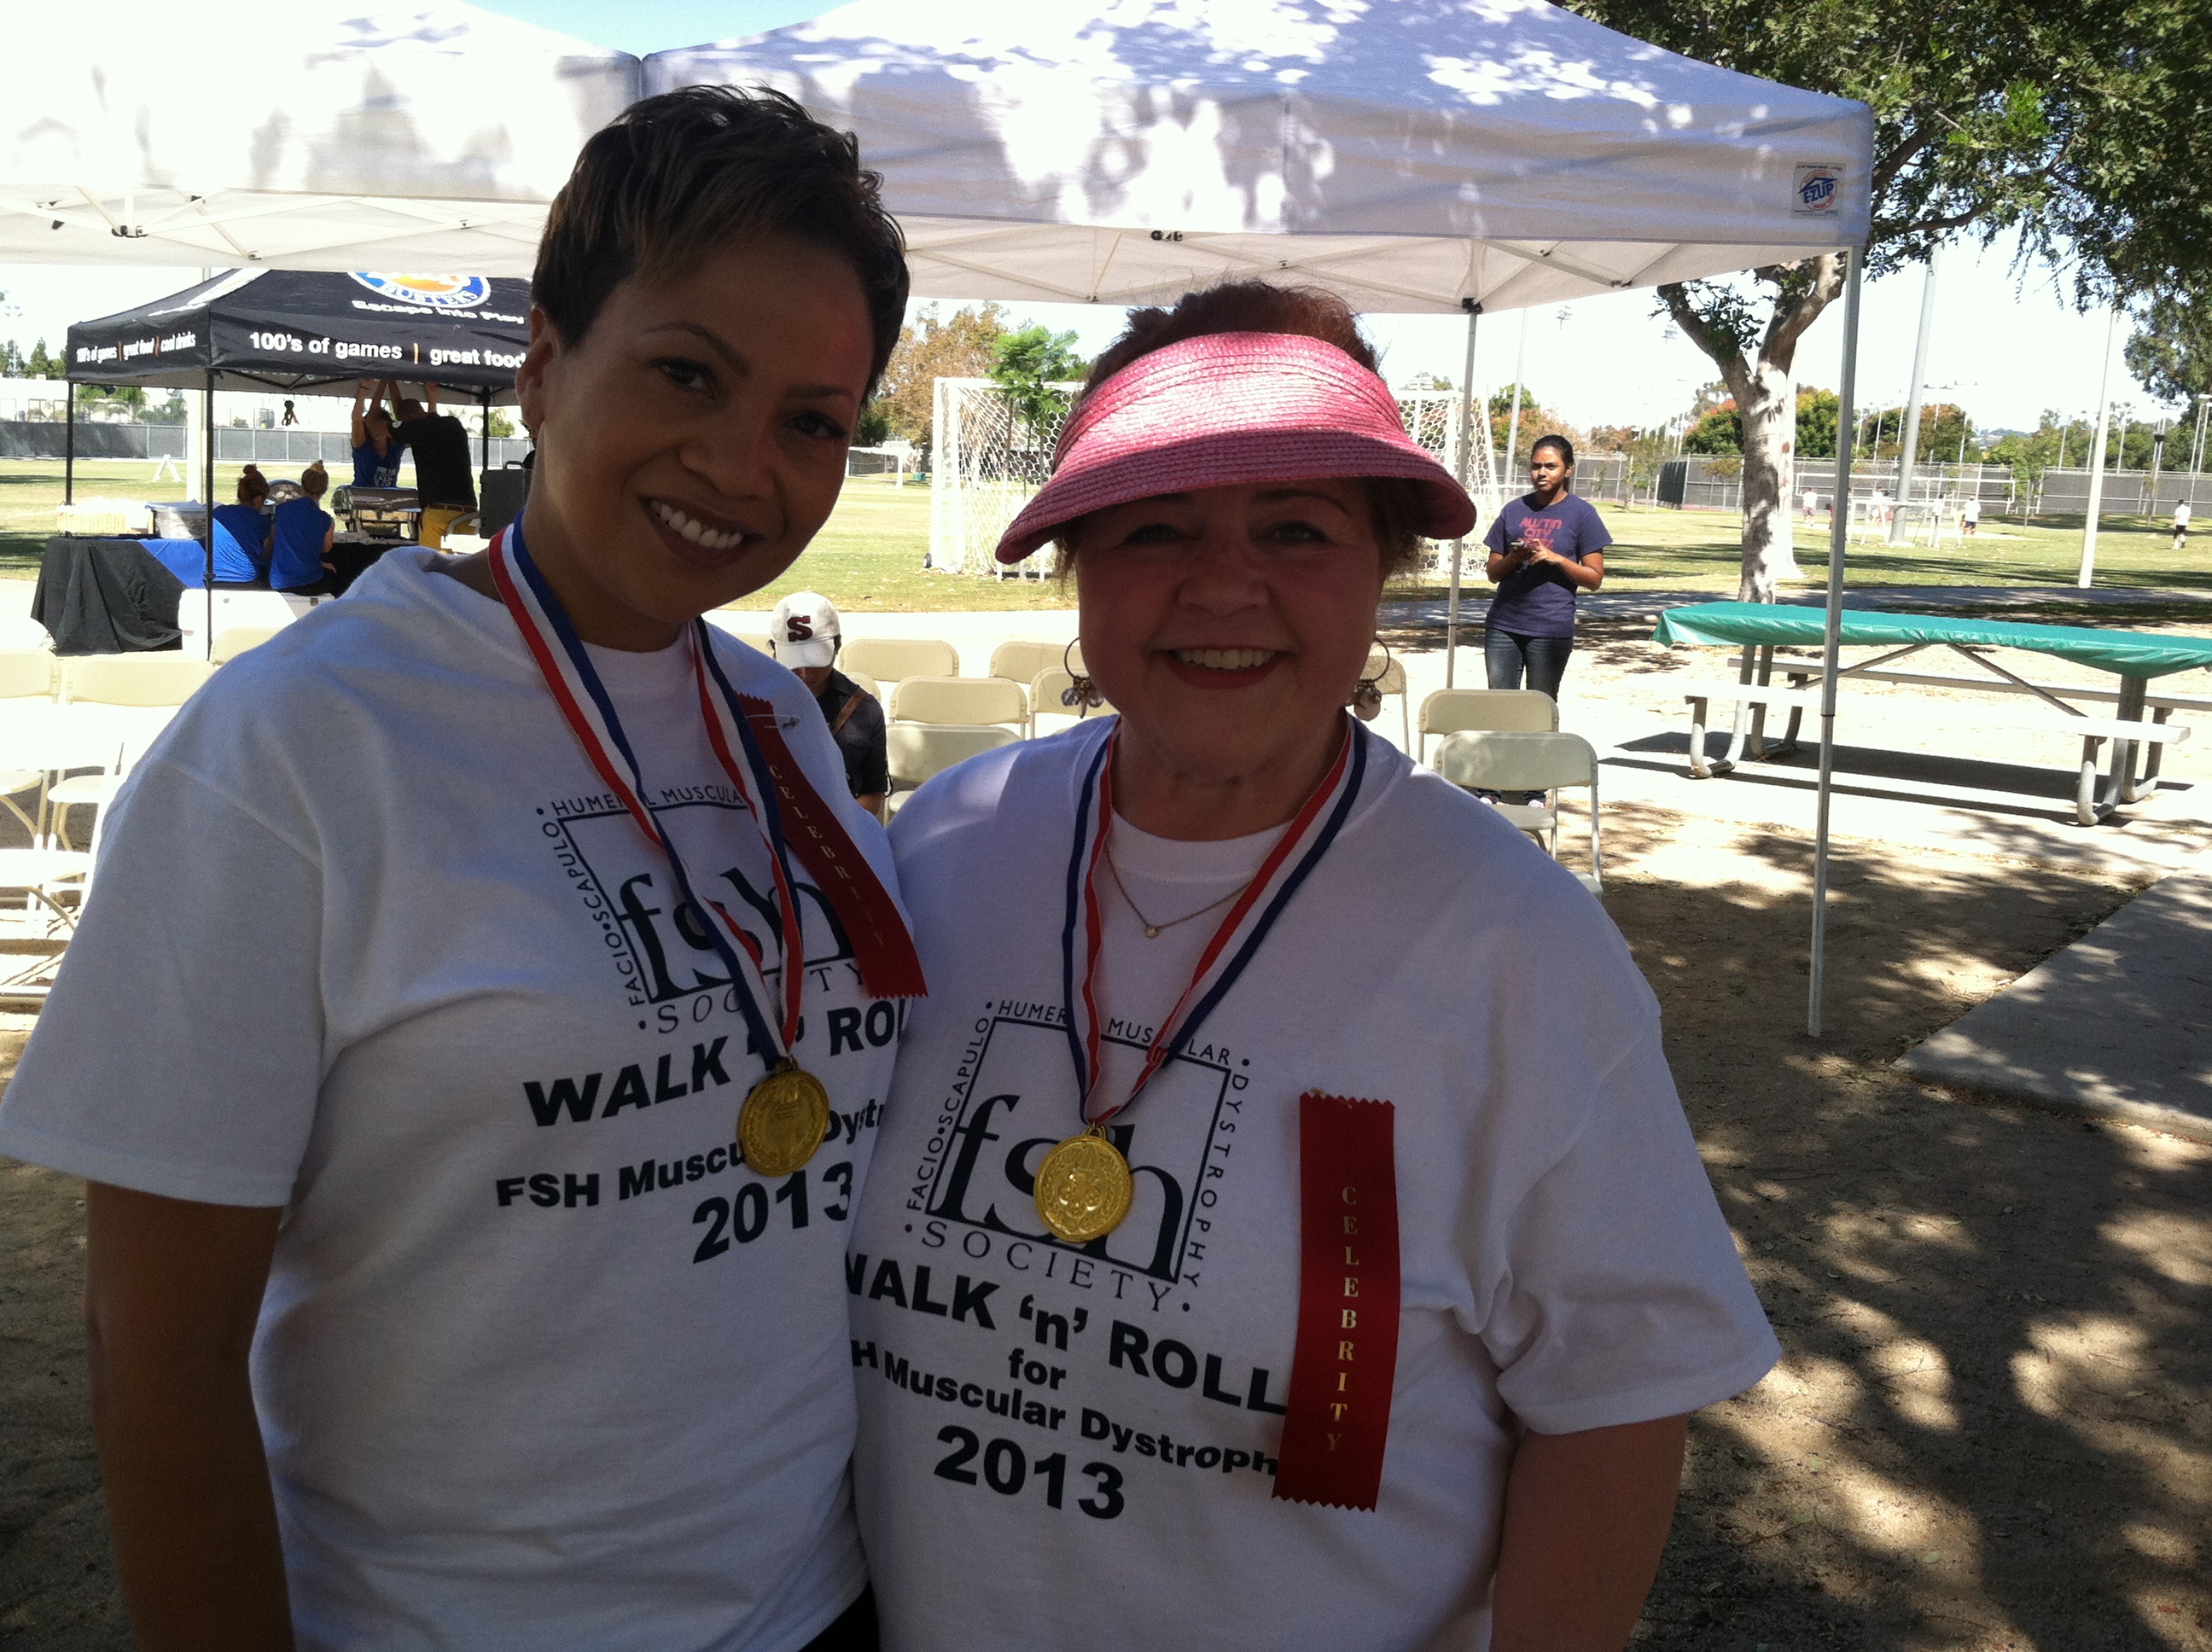 Celebrity Walk N Roll for FSH Muscular Dystrophy with Patrika Darbo